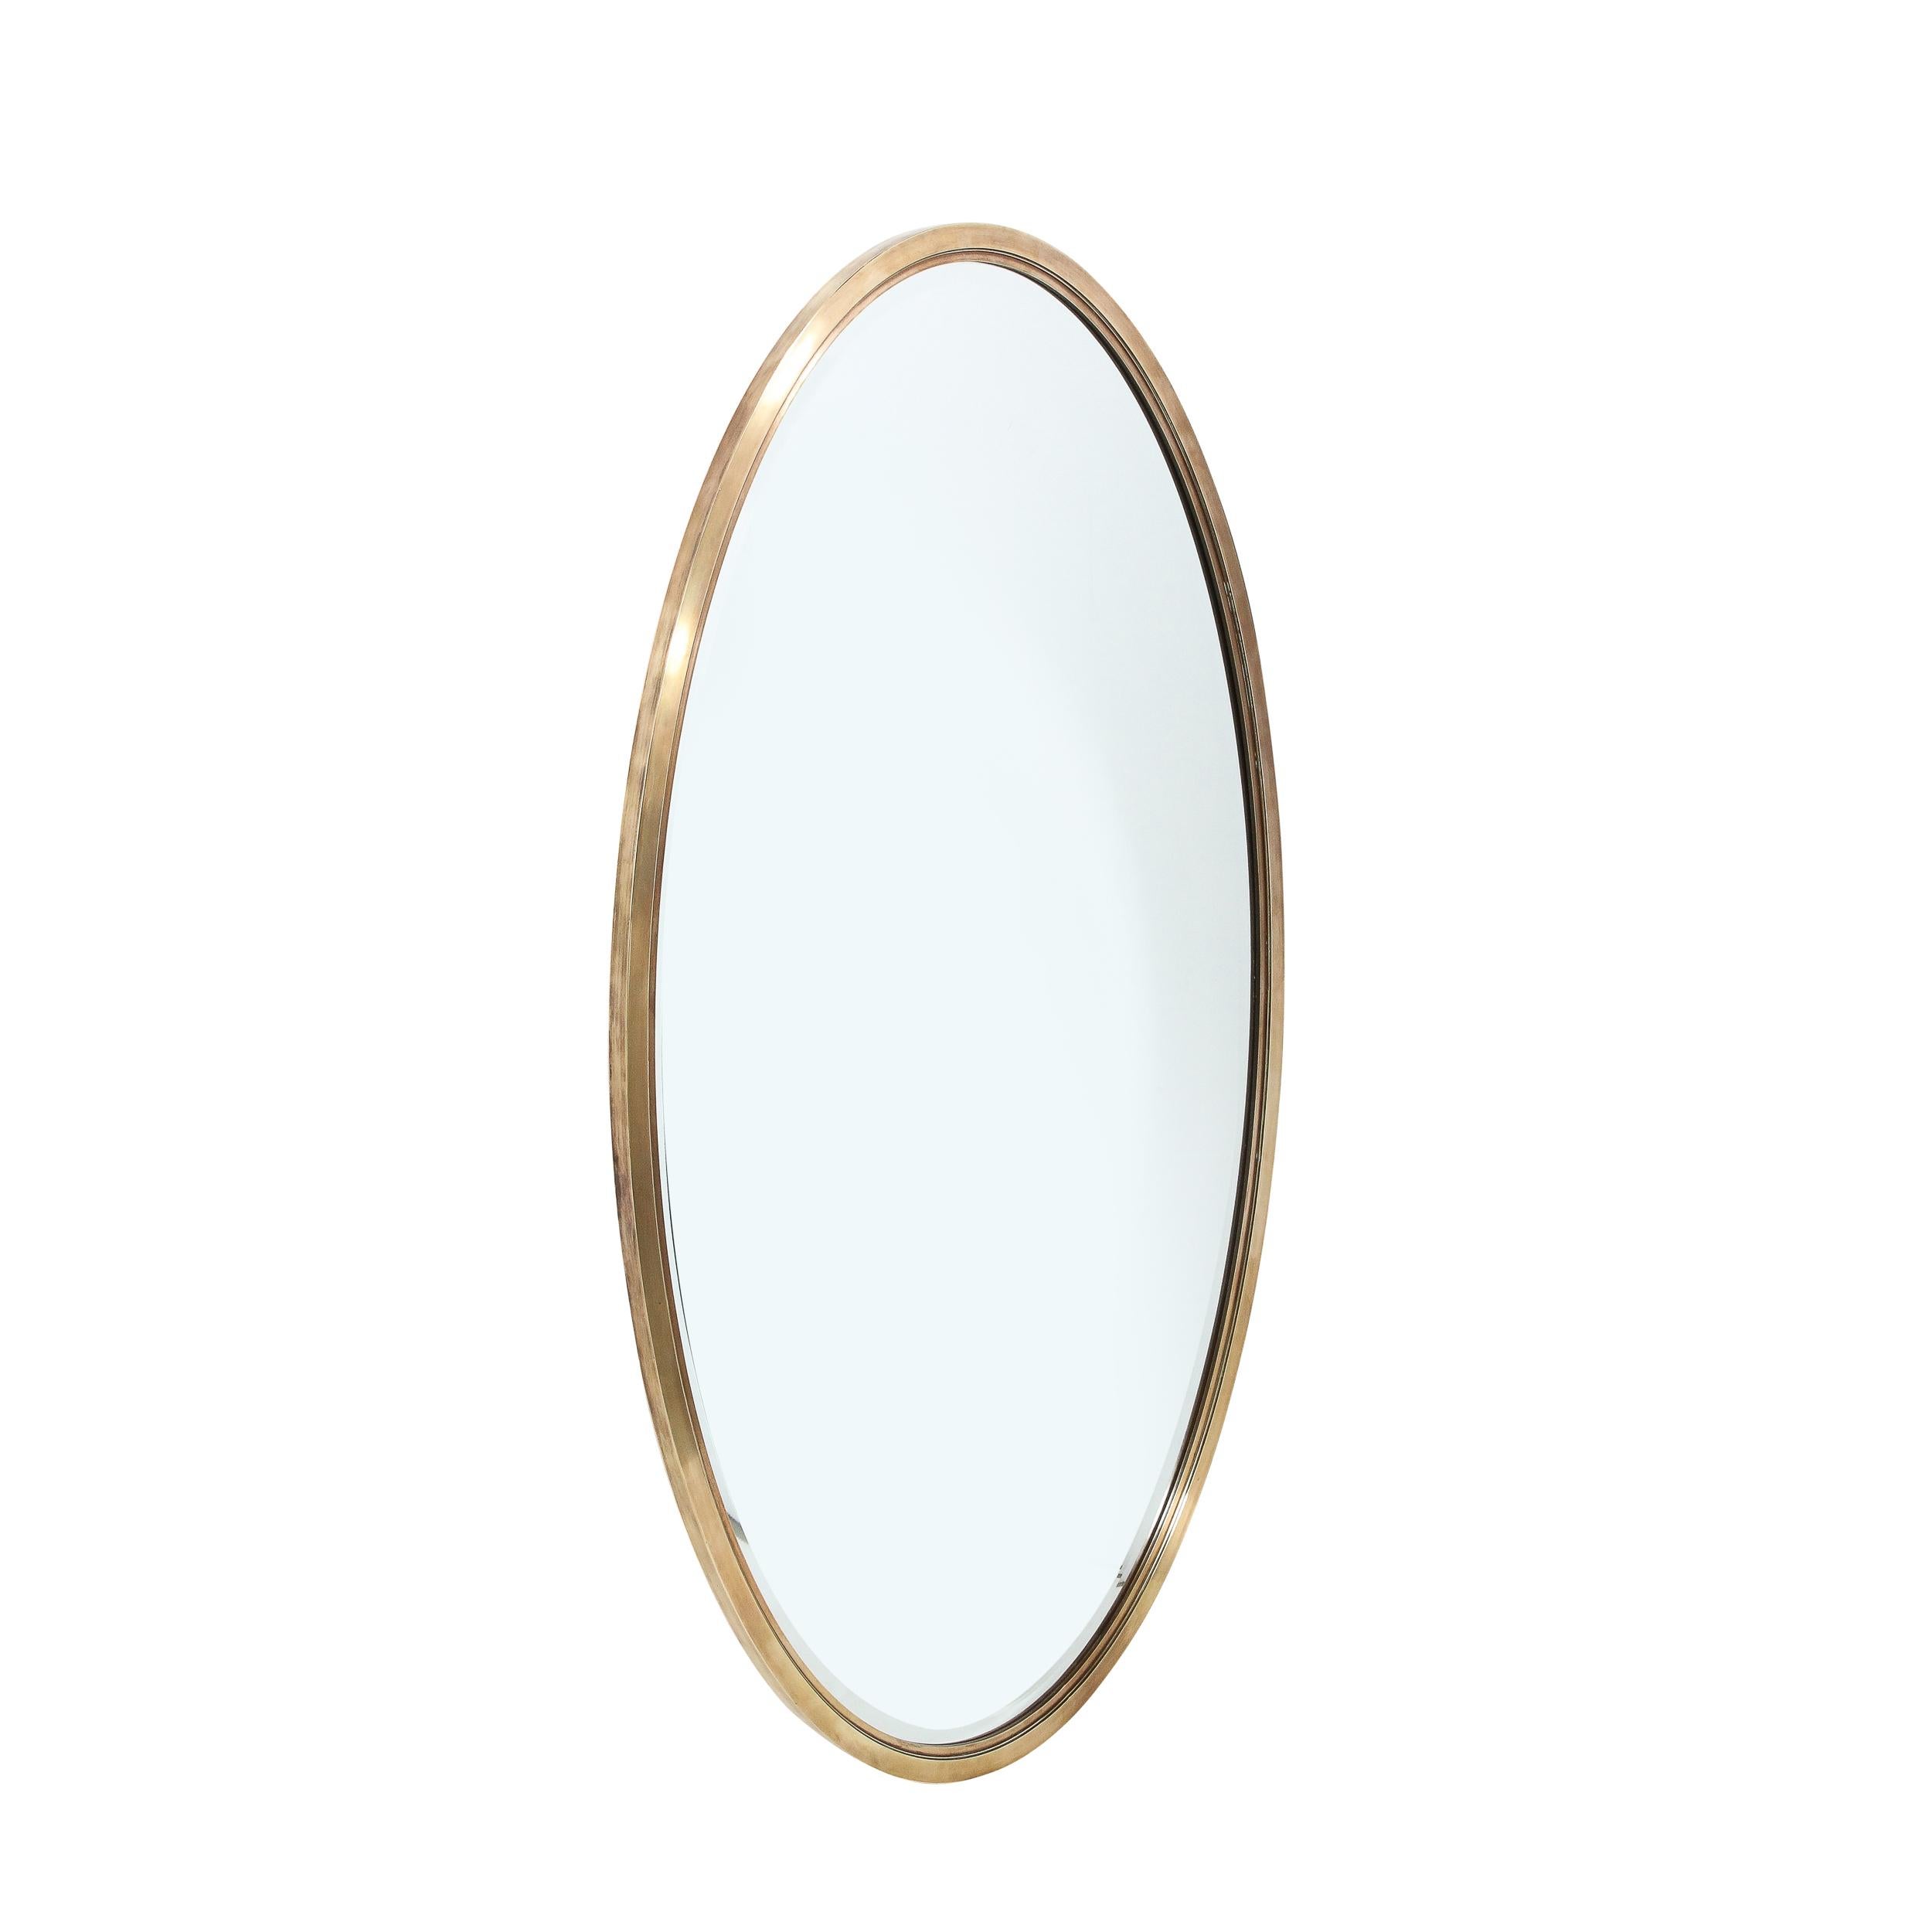 This well scaled and bold Mid-Century Modernist Oval Mirror with Polished Brass Frame originates from the United States, Circa 1960. Features a beautiful rectilinear frame in solid brass holding a polished finish with subtle stepped detailing on the